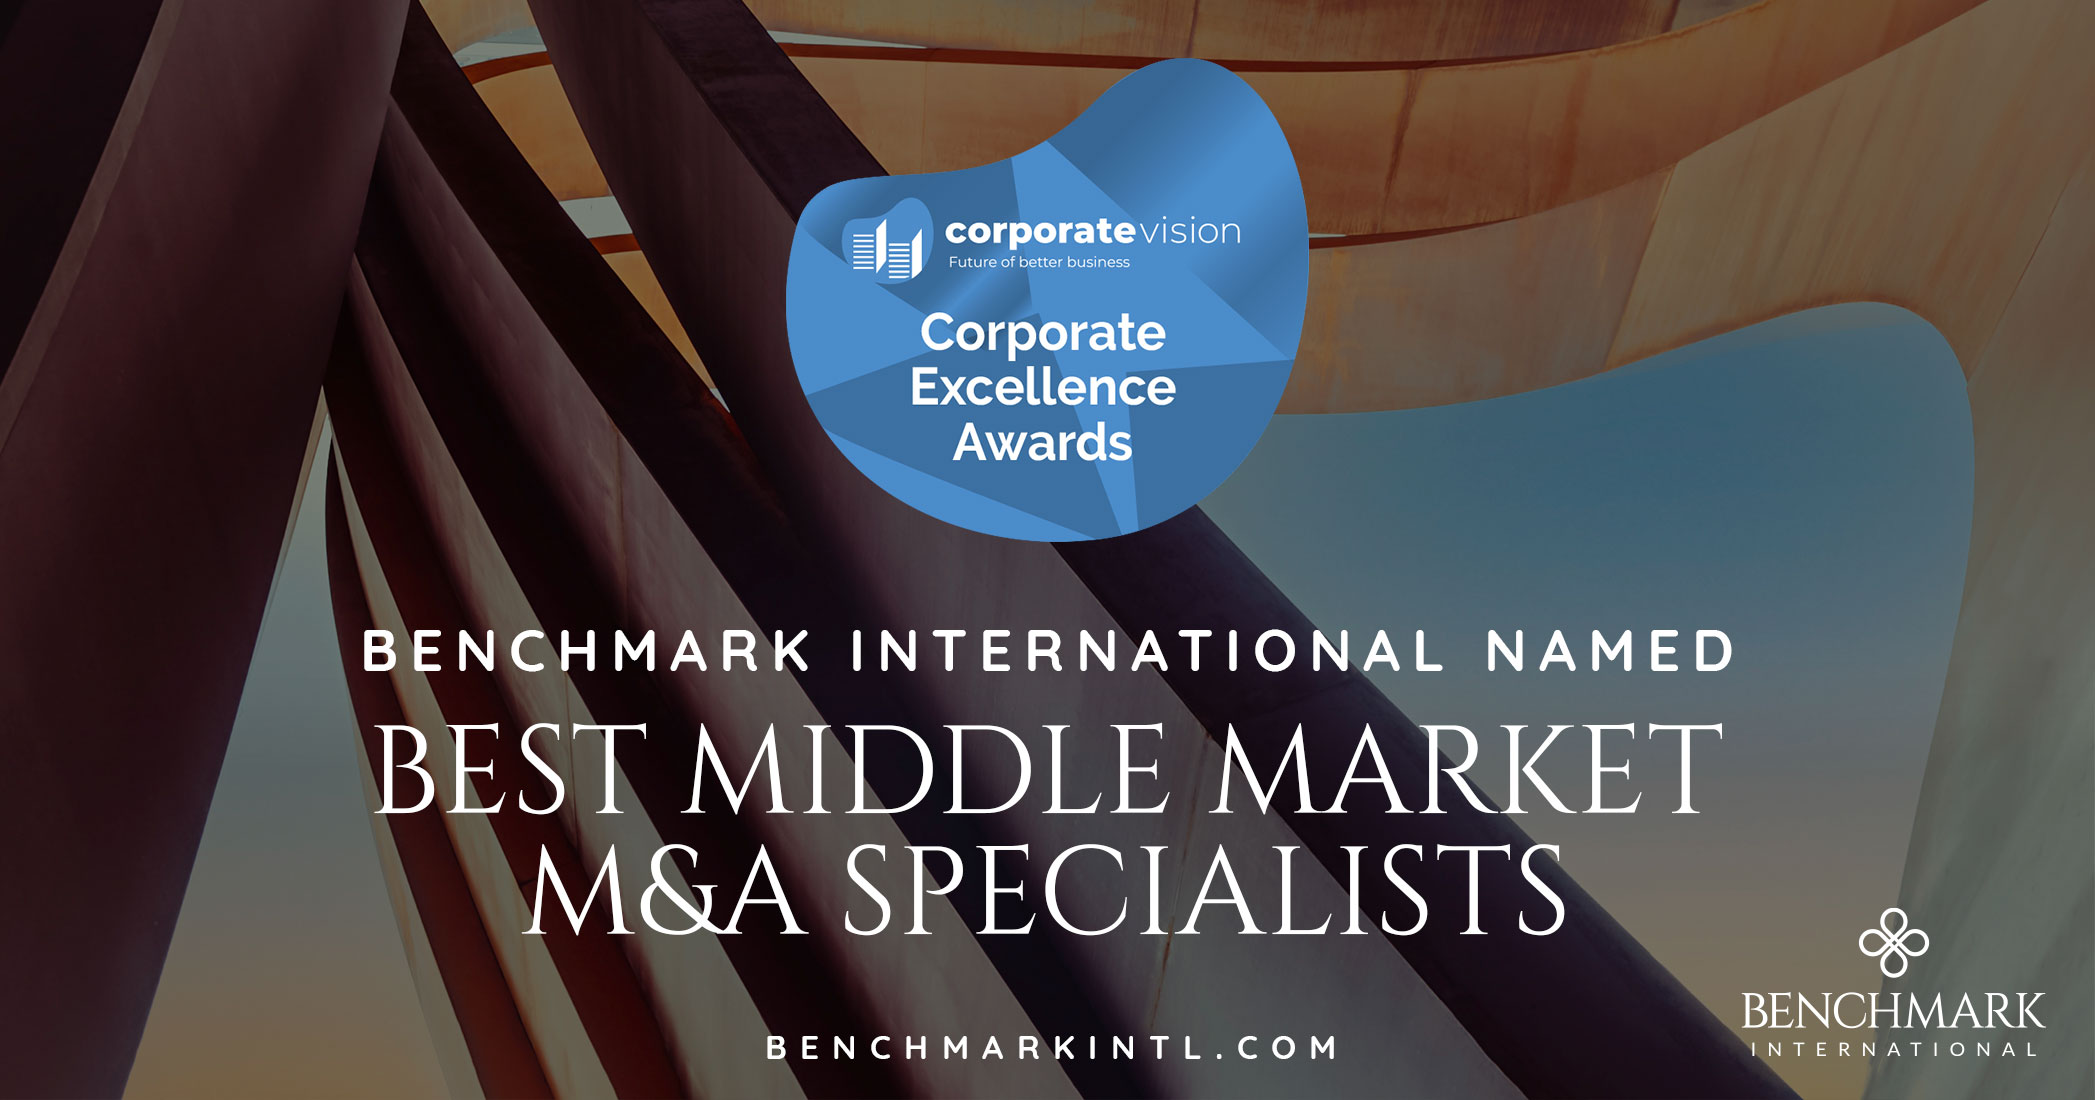 Benchmark International Named Best Middle Market M&a Specialists